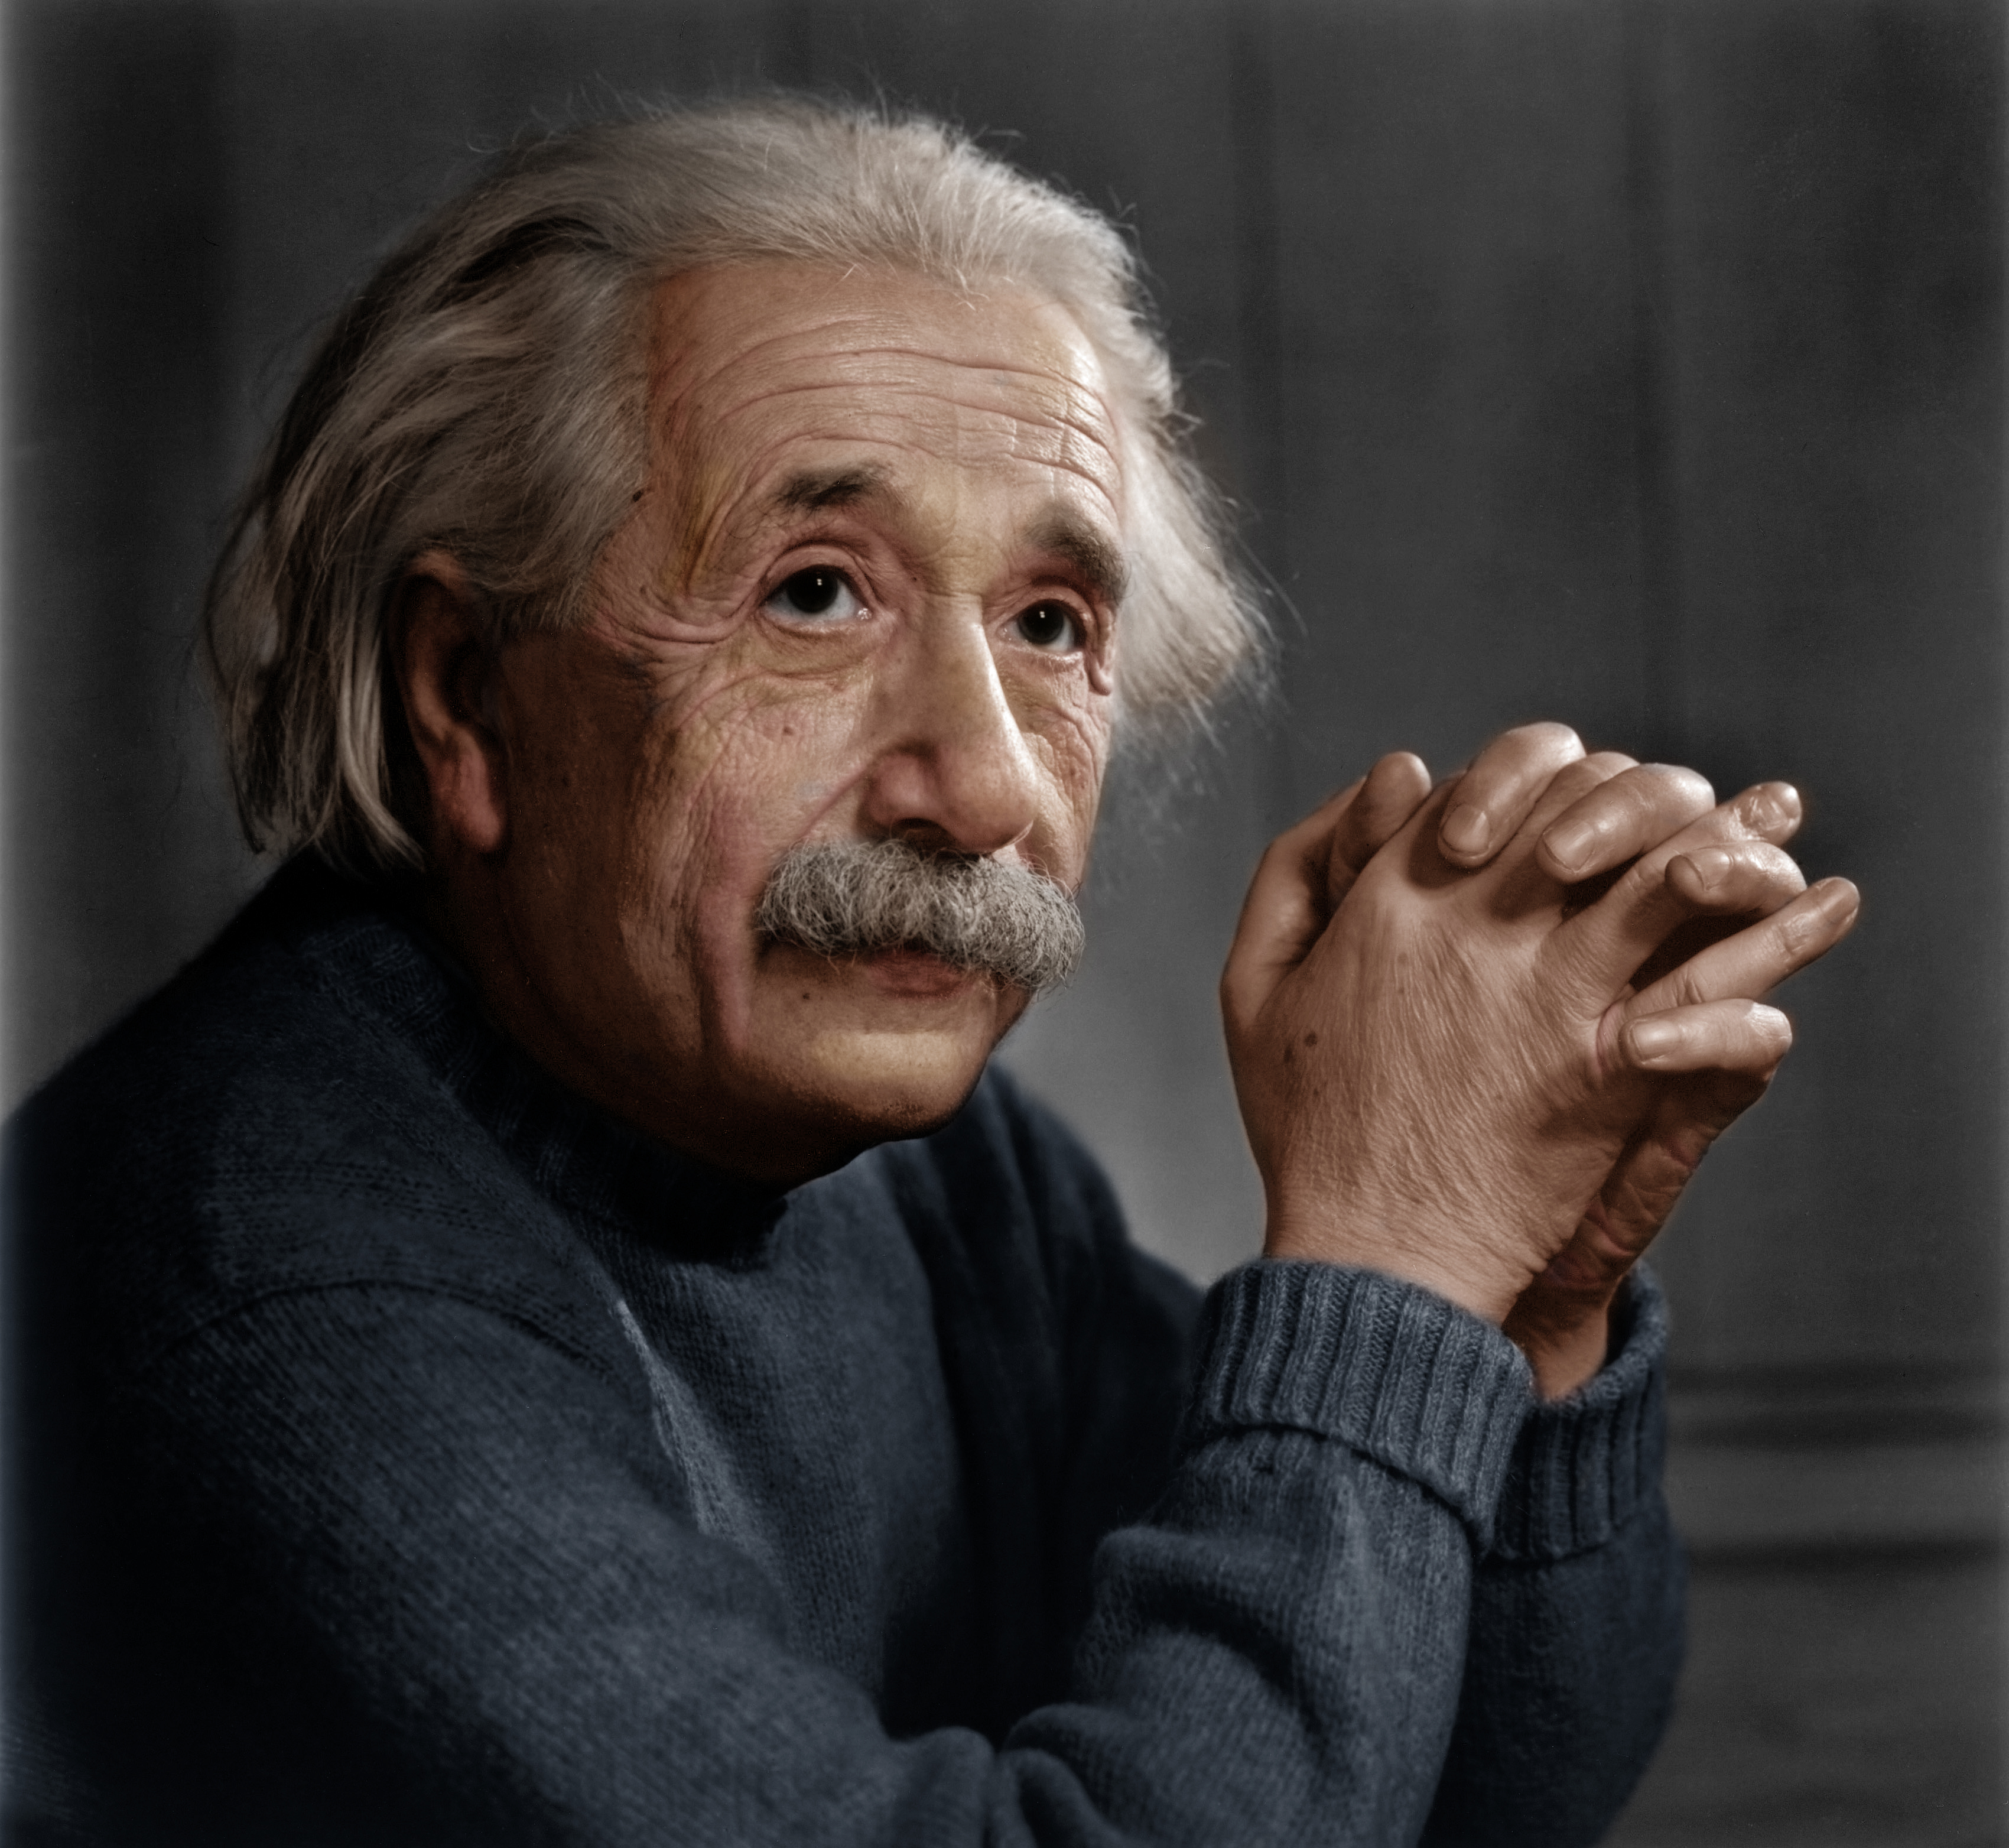 This is how Einstein answered when asked if he believed in God